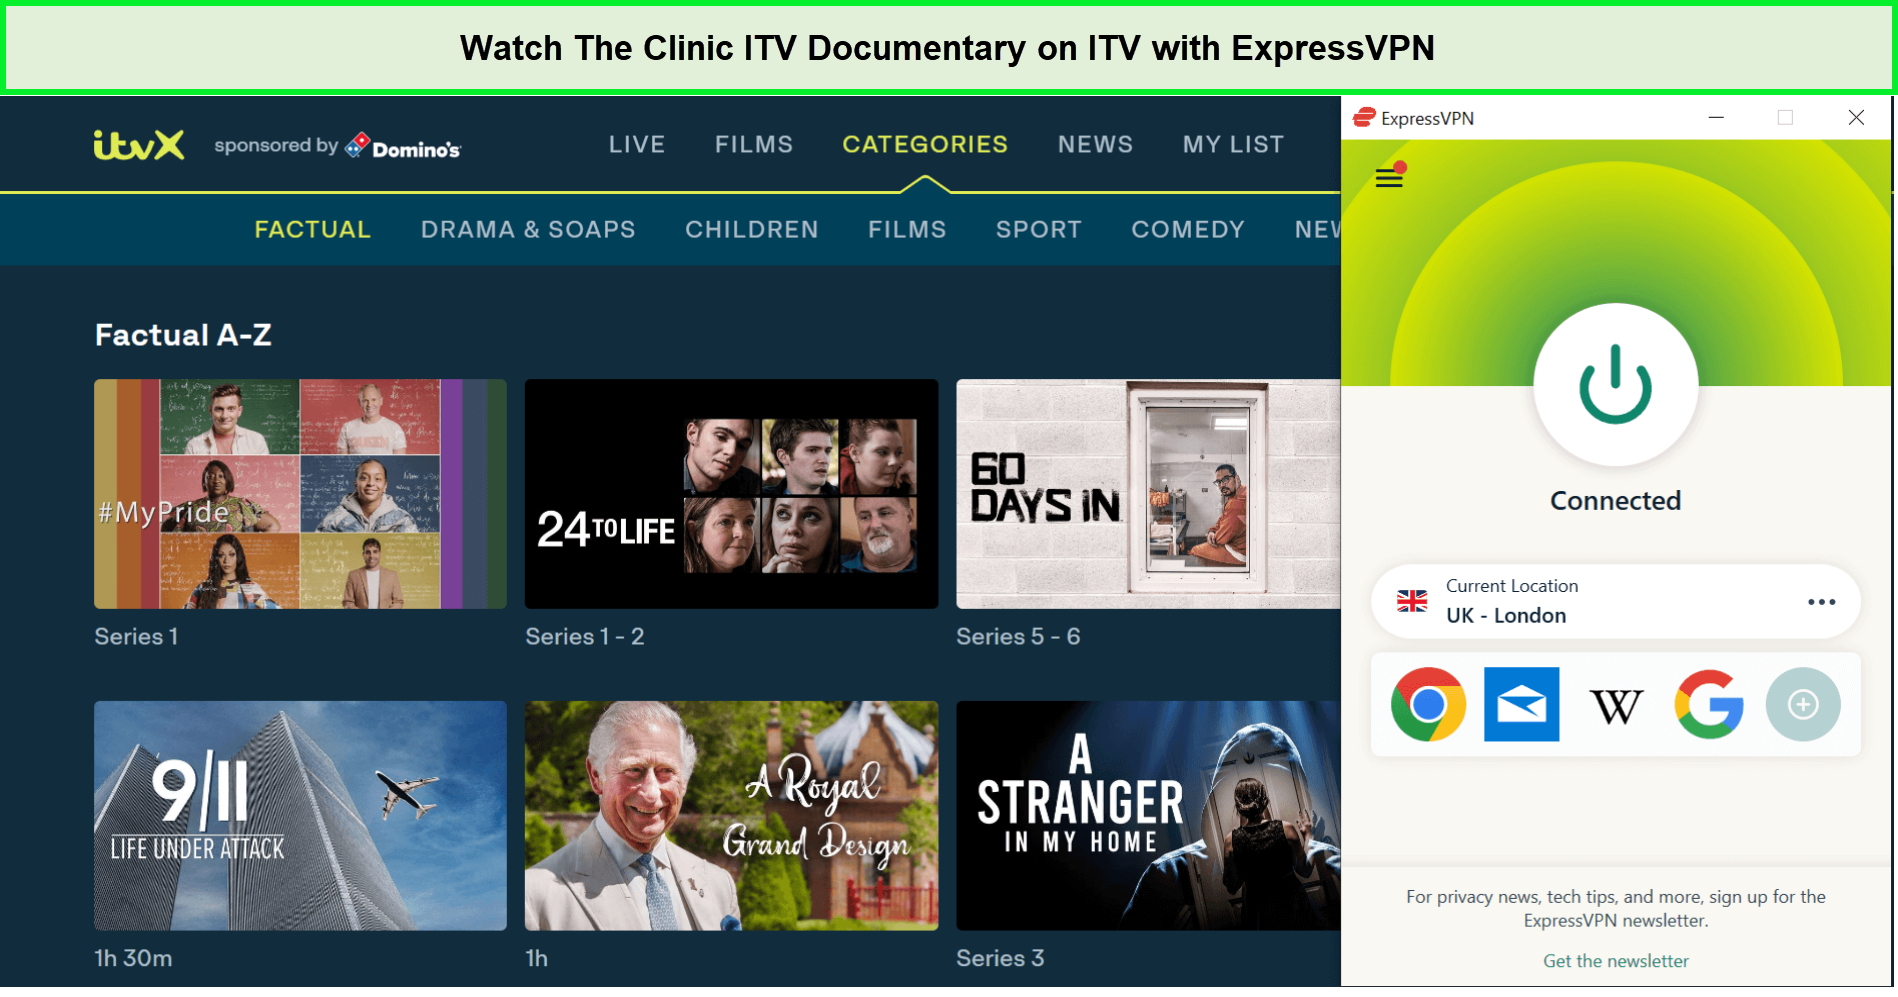 Watch-The-Clinic-ITV-Documentary-in-UAE-on-ITV-with-ExpressVPN.